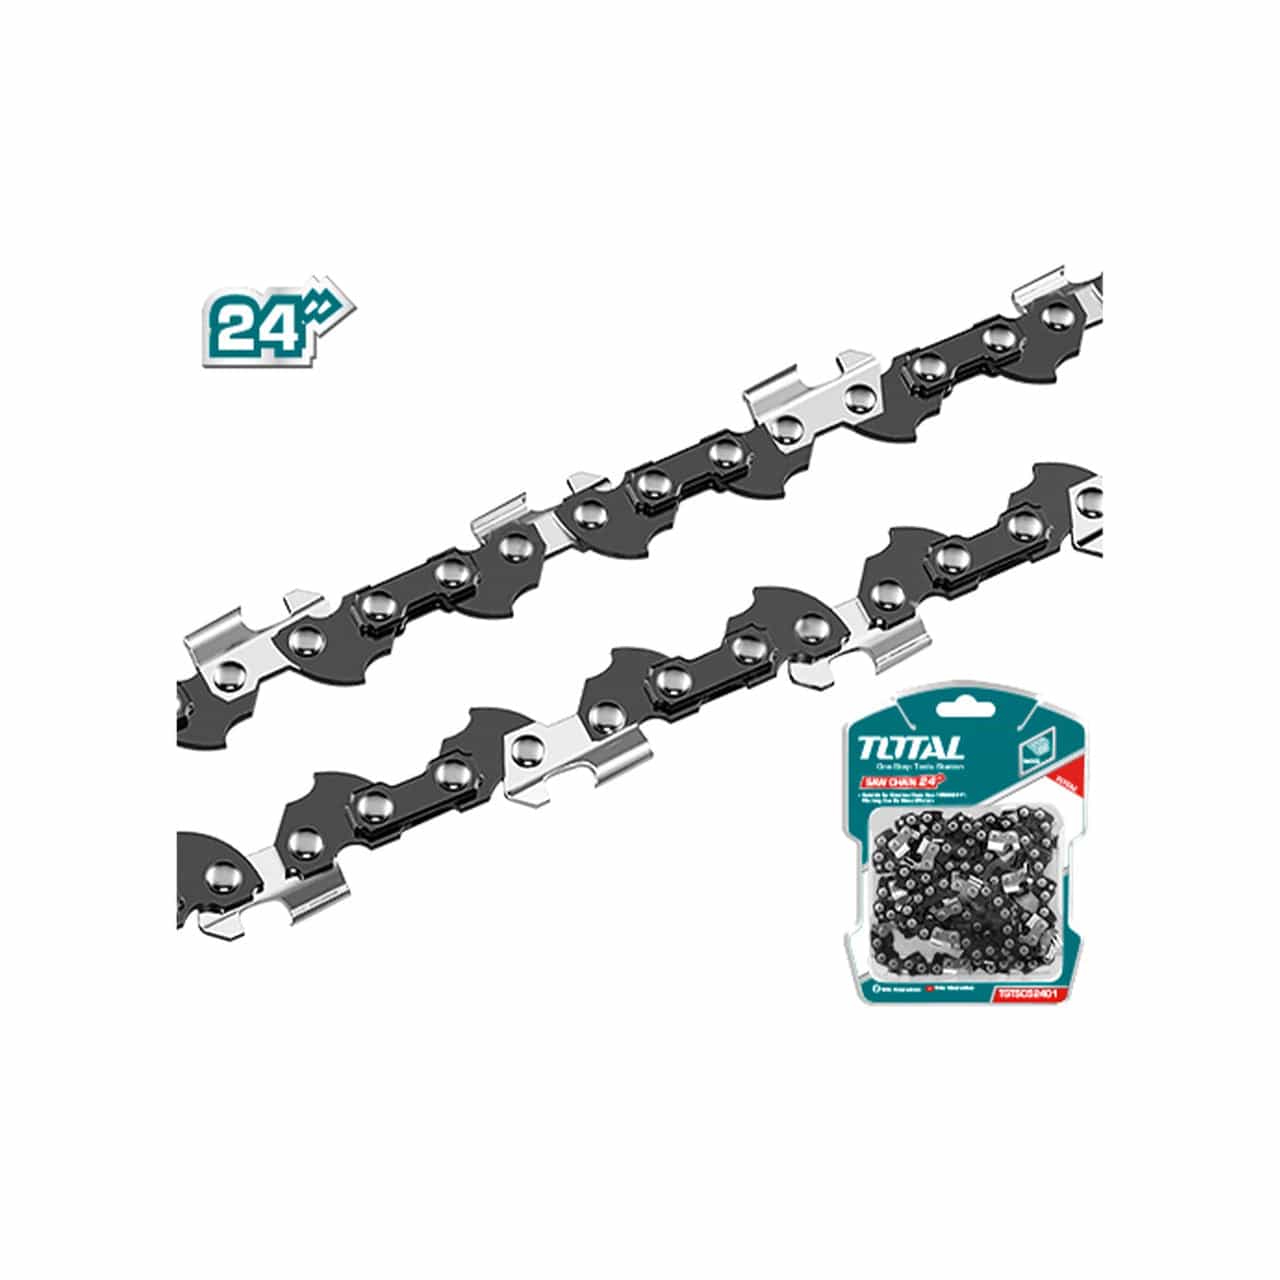 Total Saw Chain 24" - TGTSC52401 | Supply Master | Accra, Ghana Chainsaw Buy Tools hardware Building materials